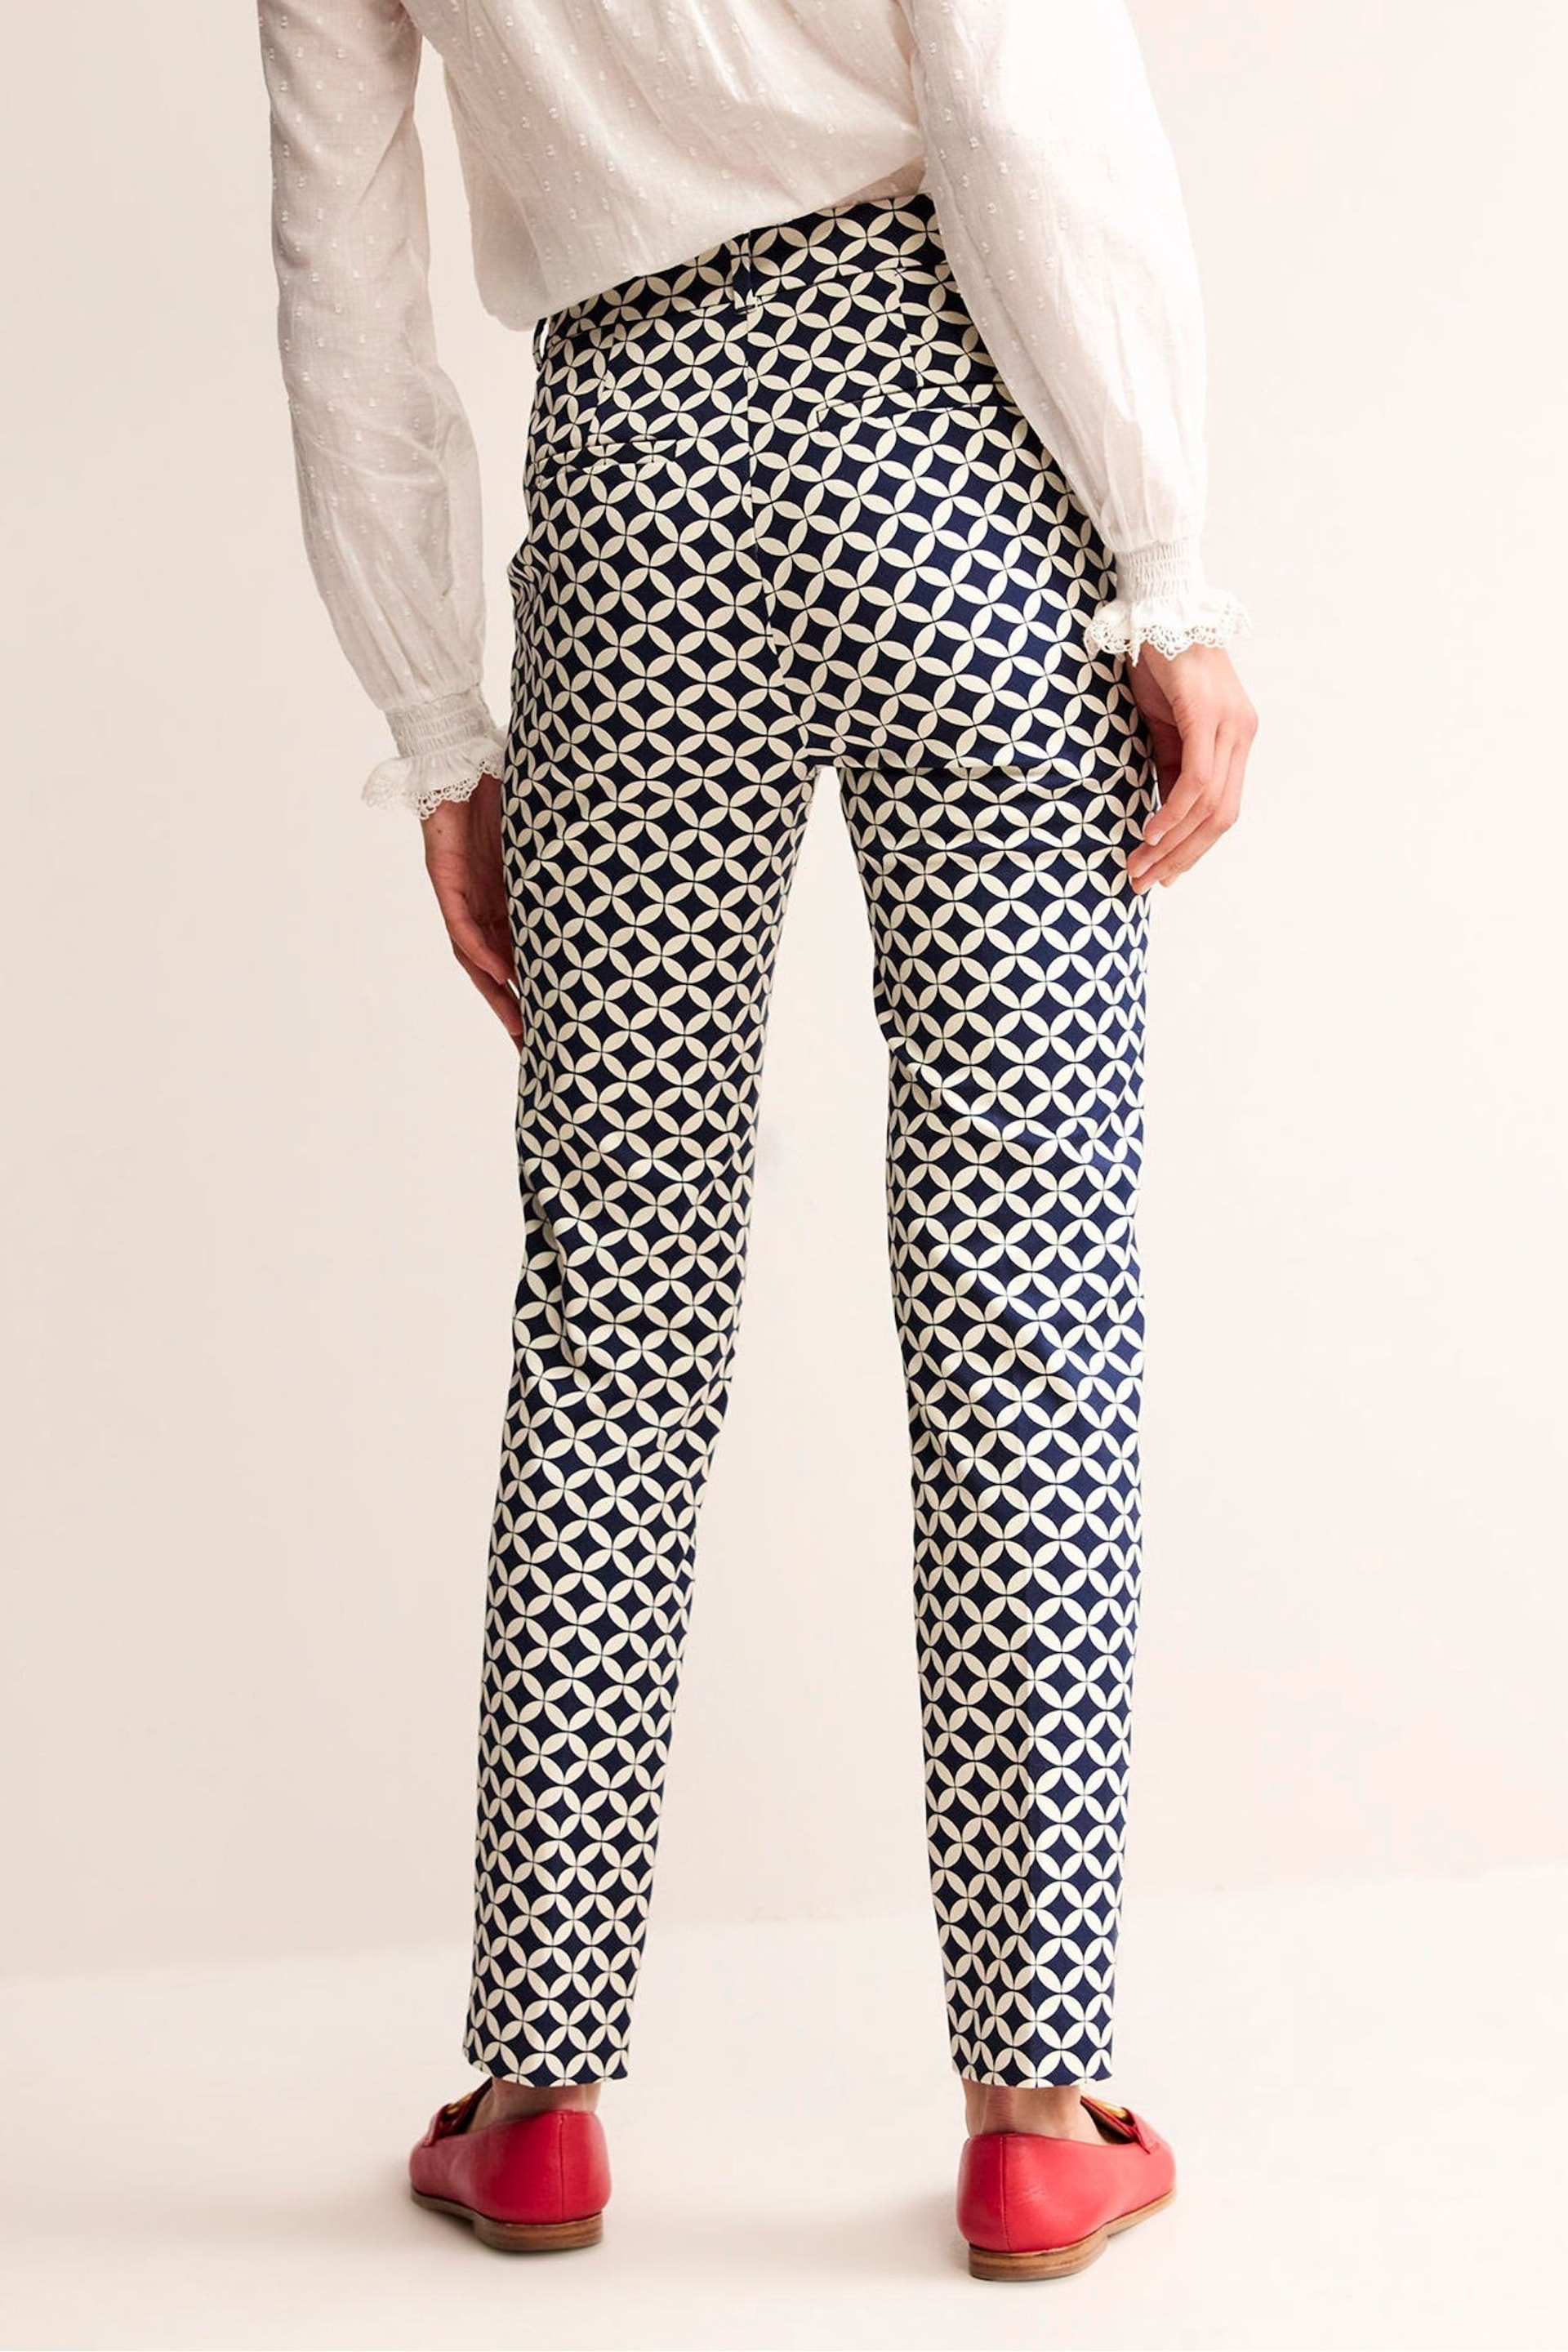 Boden Blue Highgate Printed Trousers - Image 3 of 5